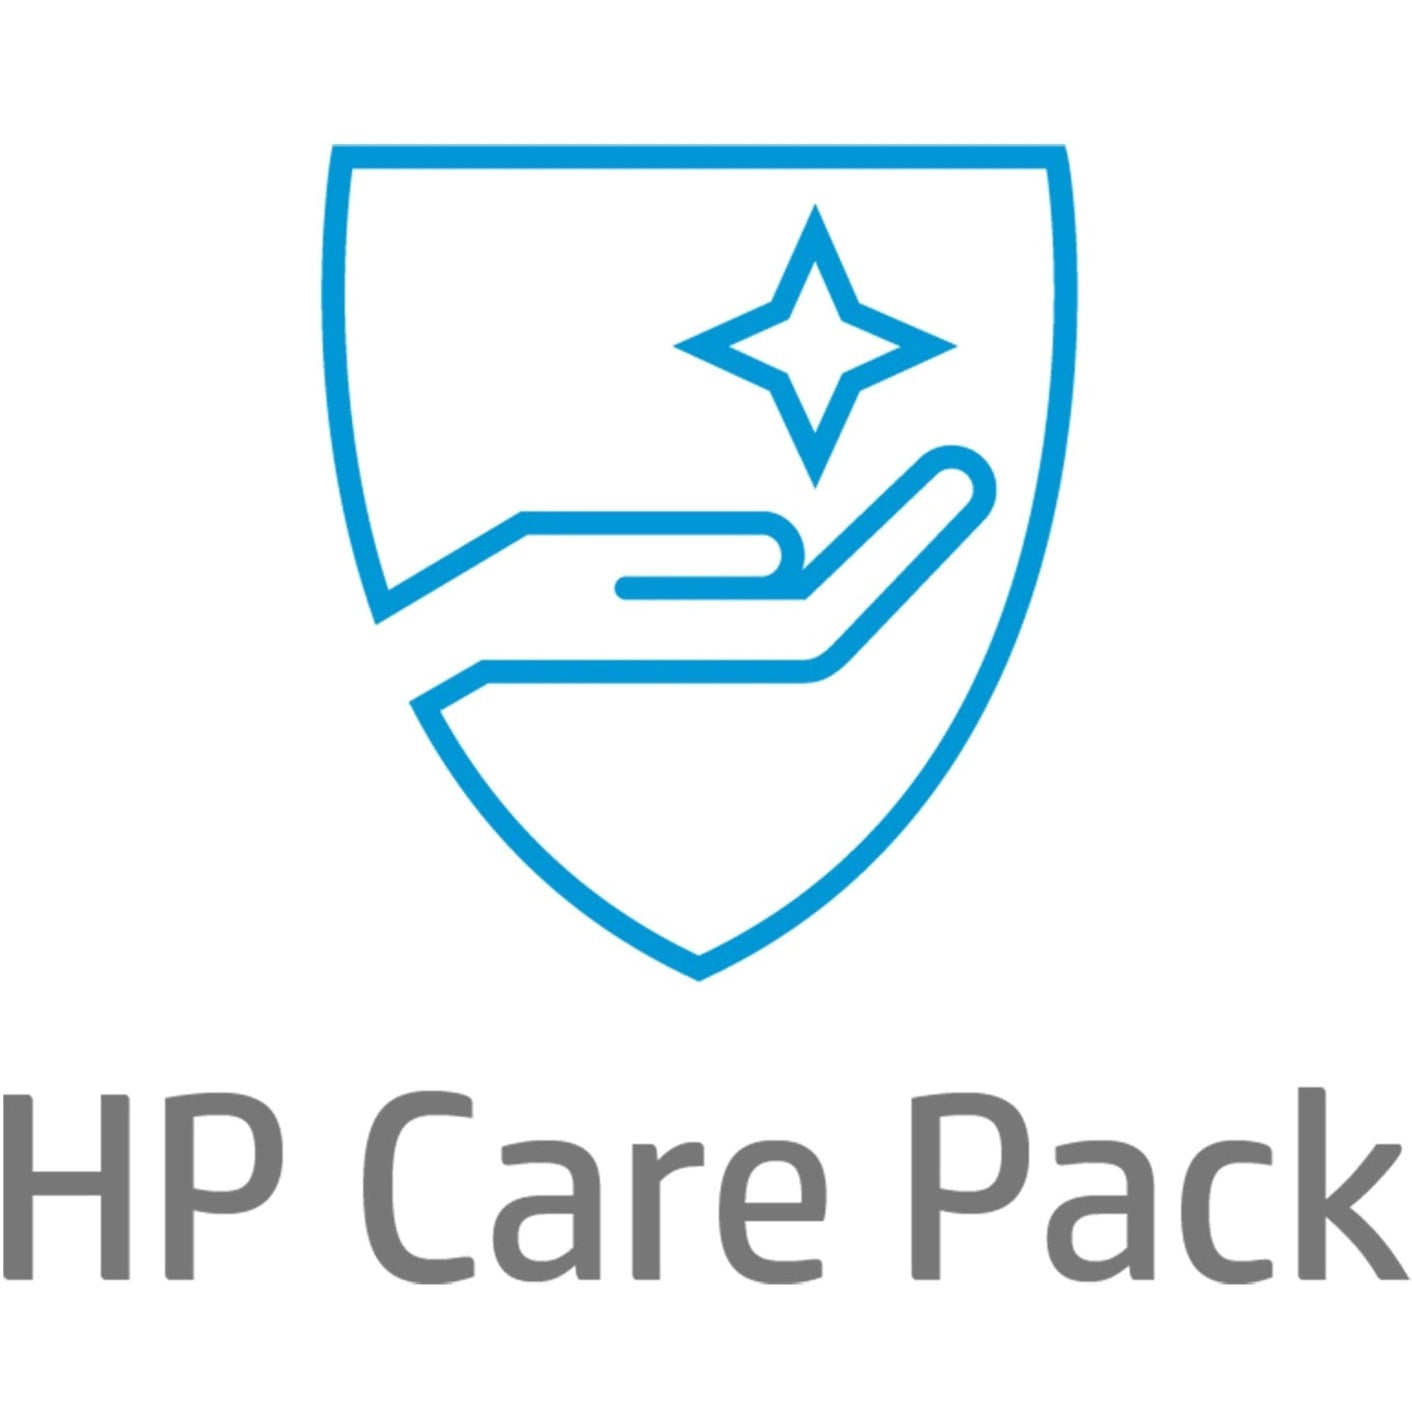 HP Care Pack Accidental Damage Hardware Support - 4 Year - Service (U9586E)